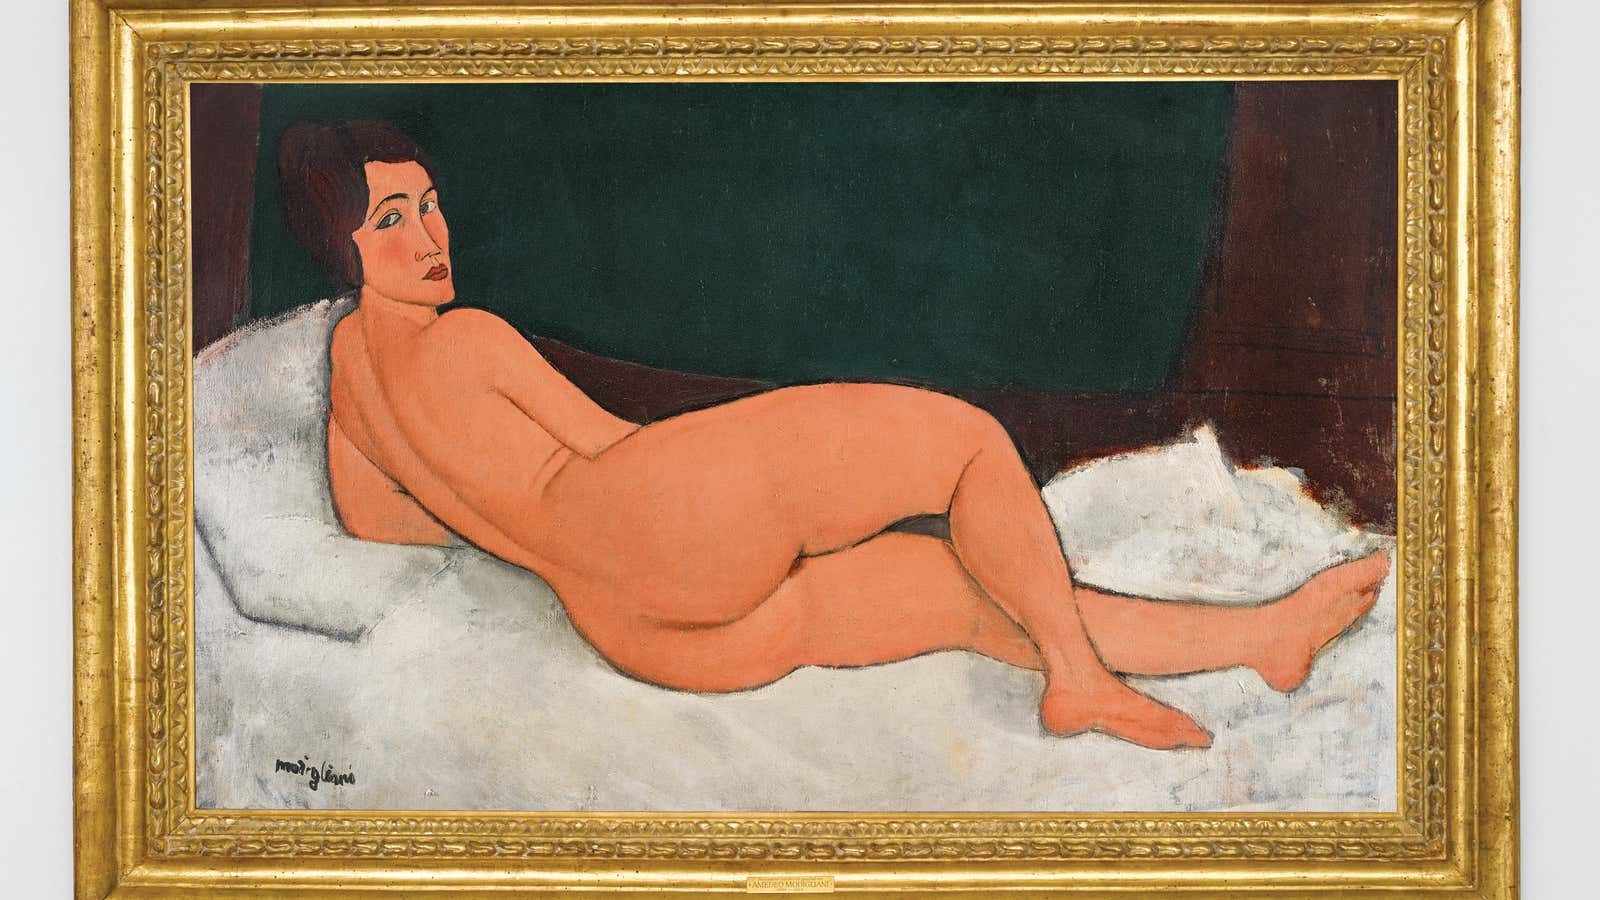 Is $100 million becoming the new minimum auction price for fine art?